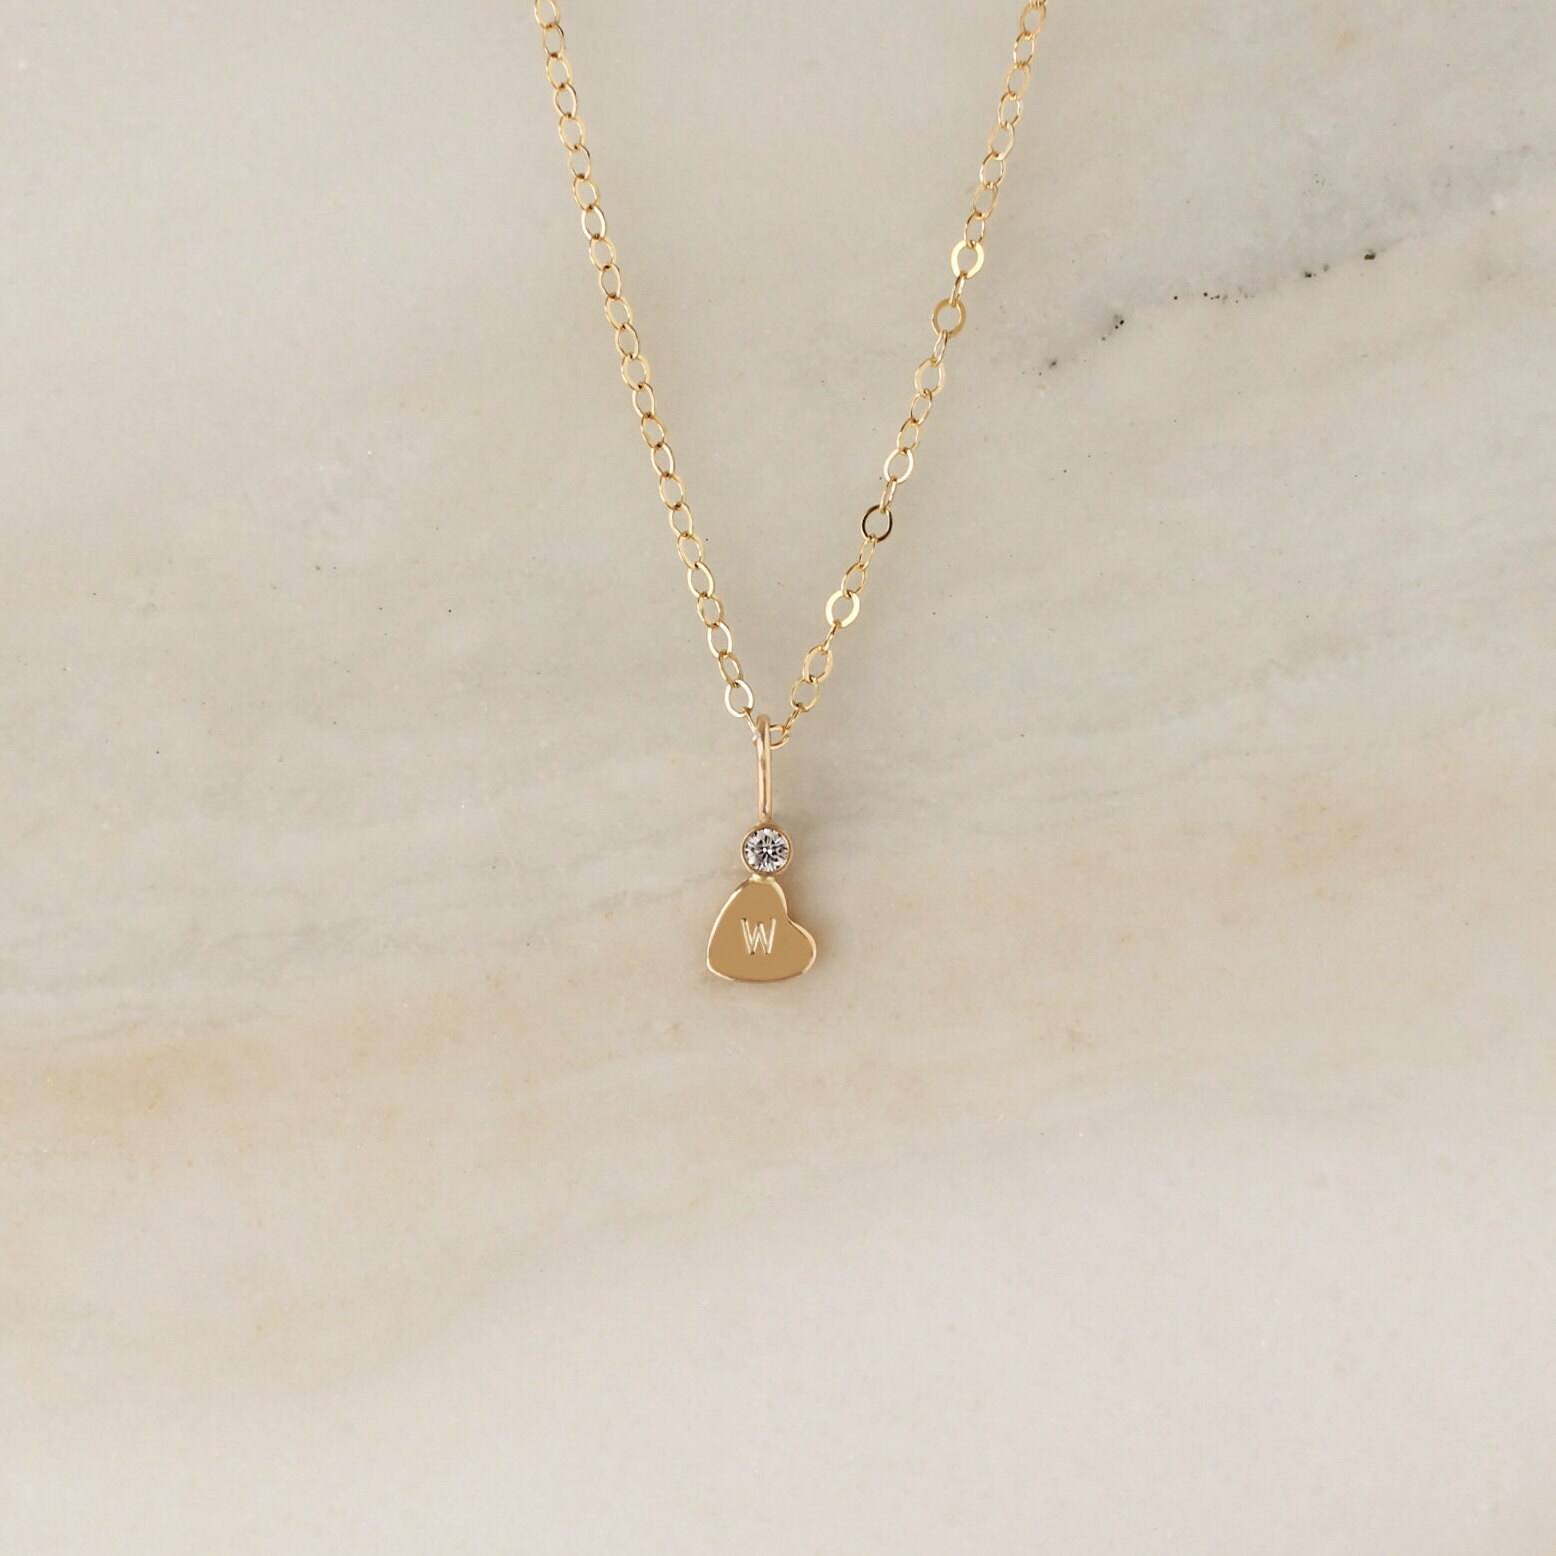 Caitlin Covington Creator Drop Necklace, Personalized Heart Initial Necklace, Valentines Gift Idea, Diamond Charm Necklace, Gift for Mom